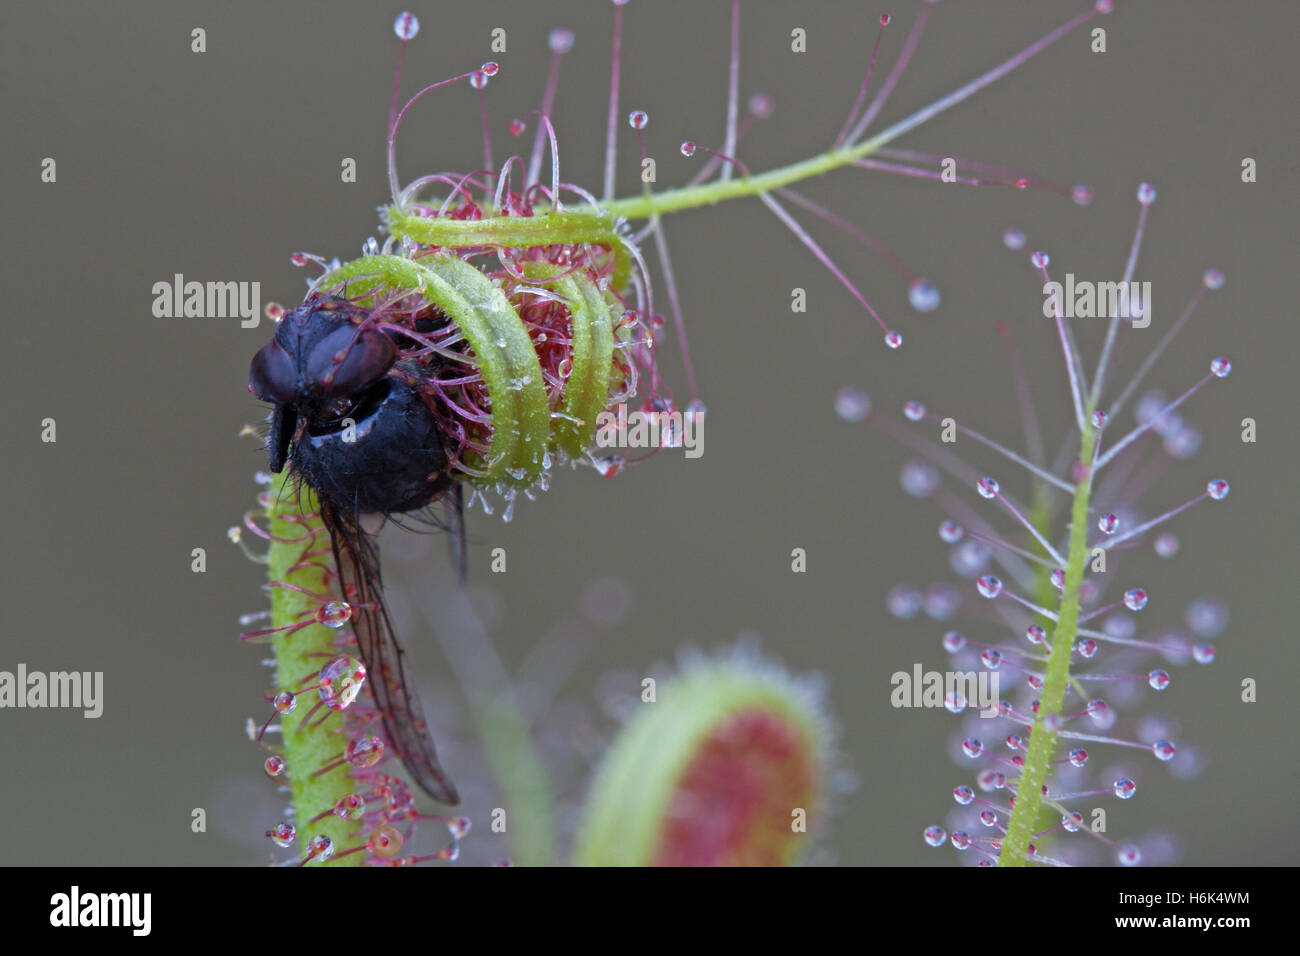 Drosera indica Sundew from Jacky Jacky Northern Queensland Australia eating a fly clos up Stock Photo